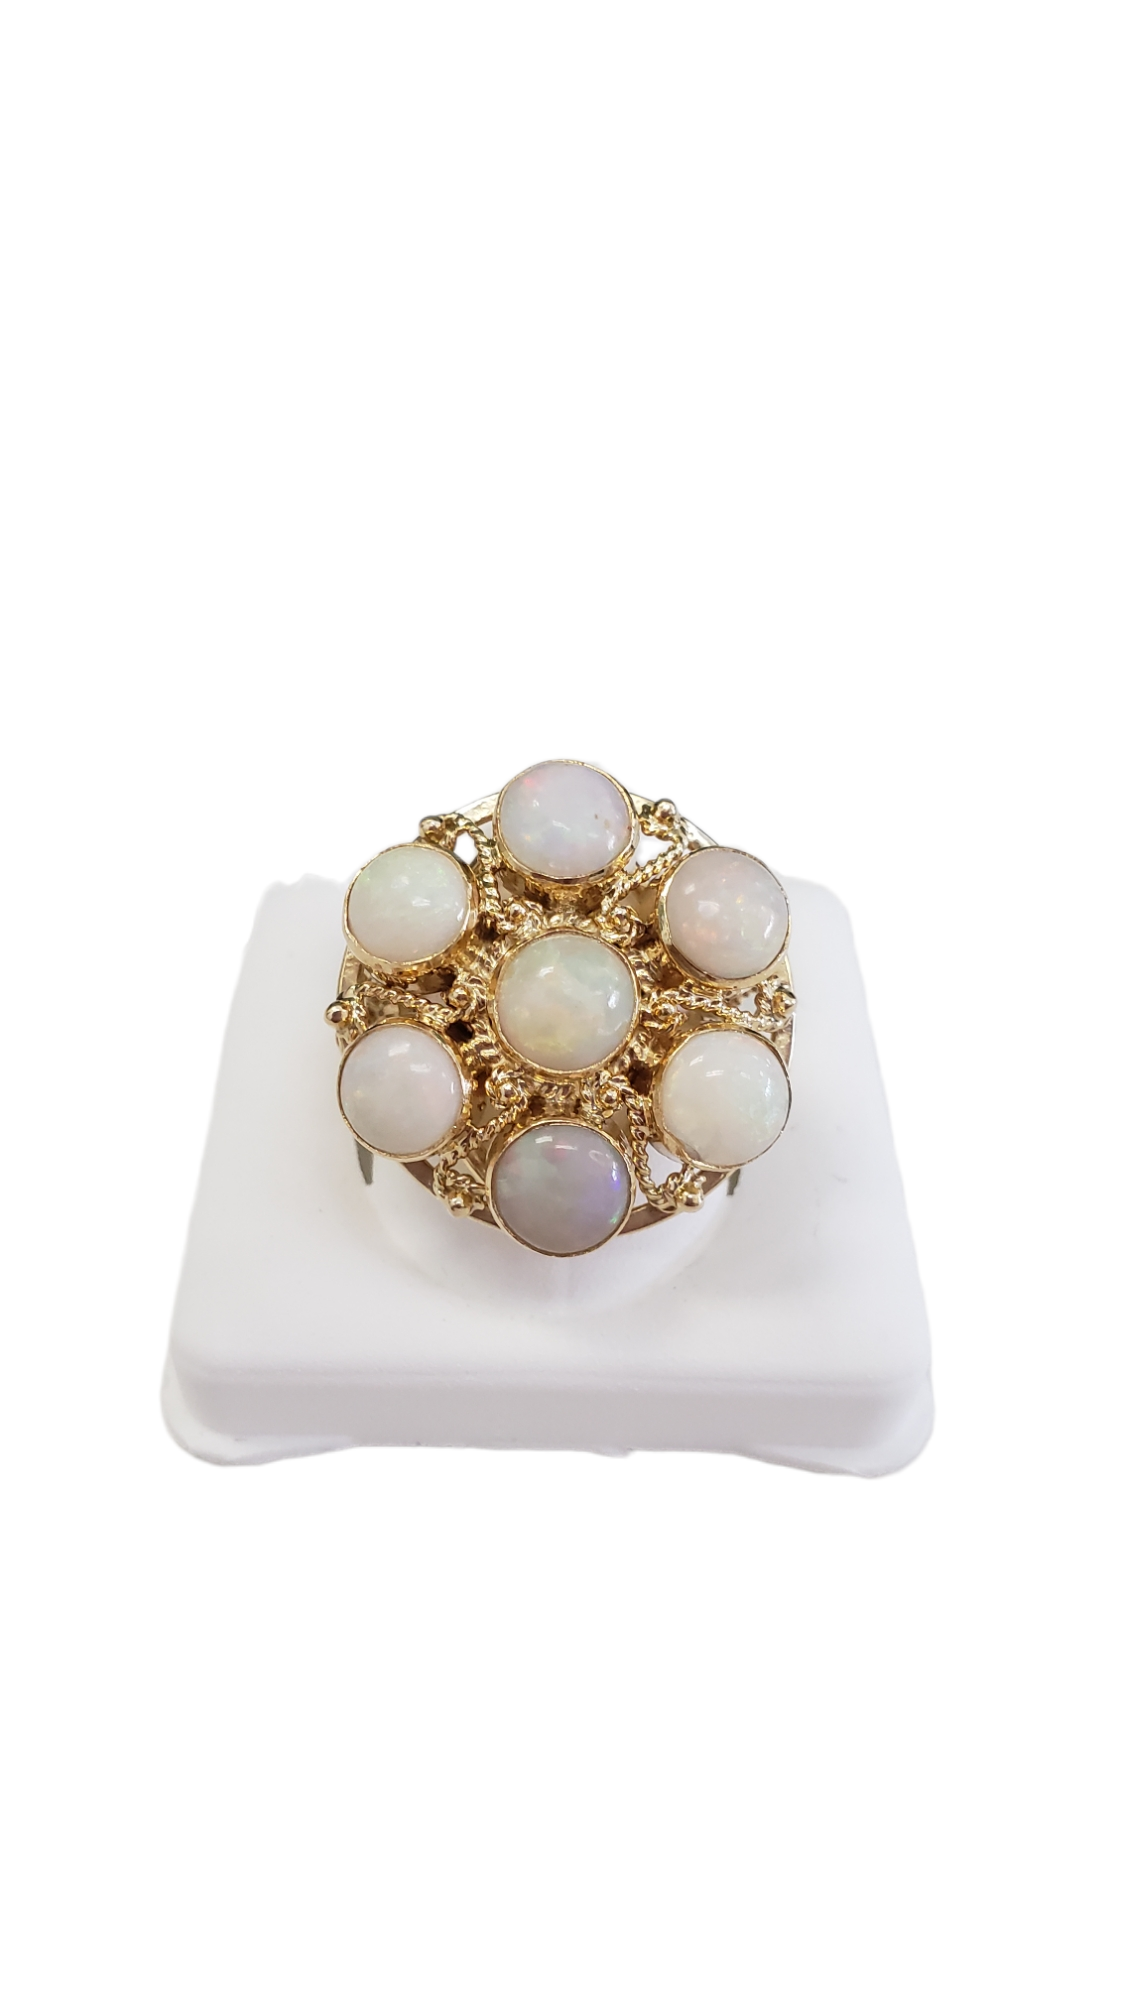 14K Yellow Gold Opal Cluster Ring Size 6(US) Preowned